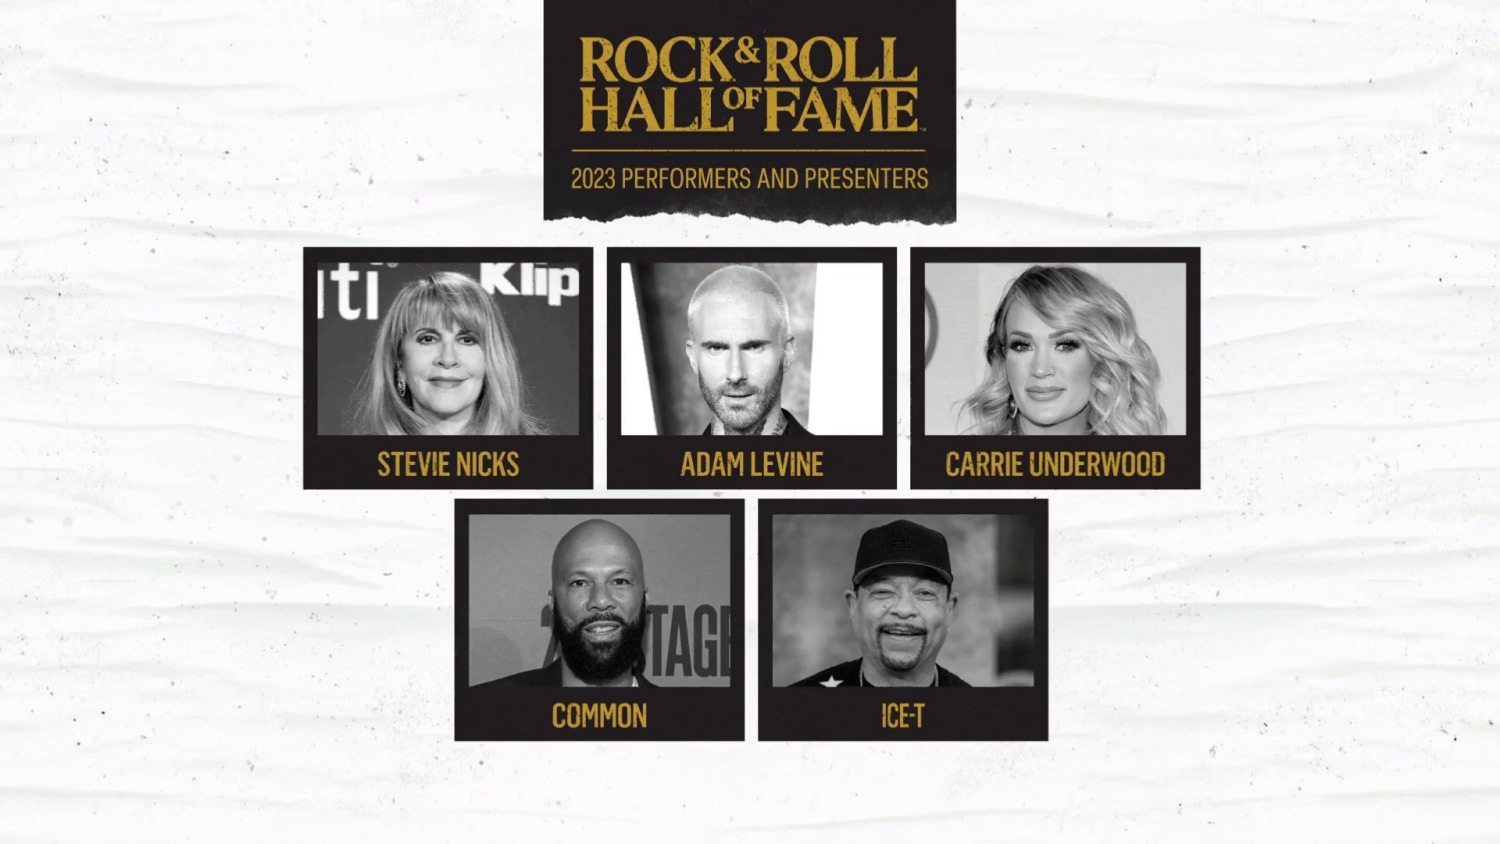 2023 Rock & Roll Hall of Fame Induction Ceremony tickets go on